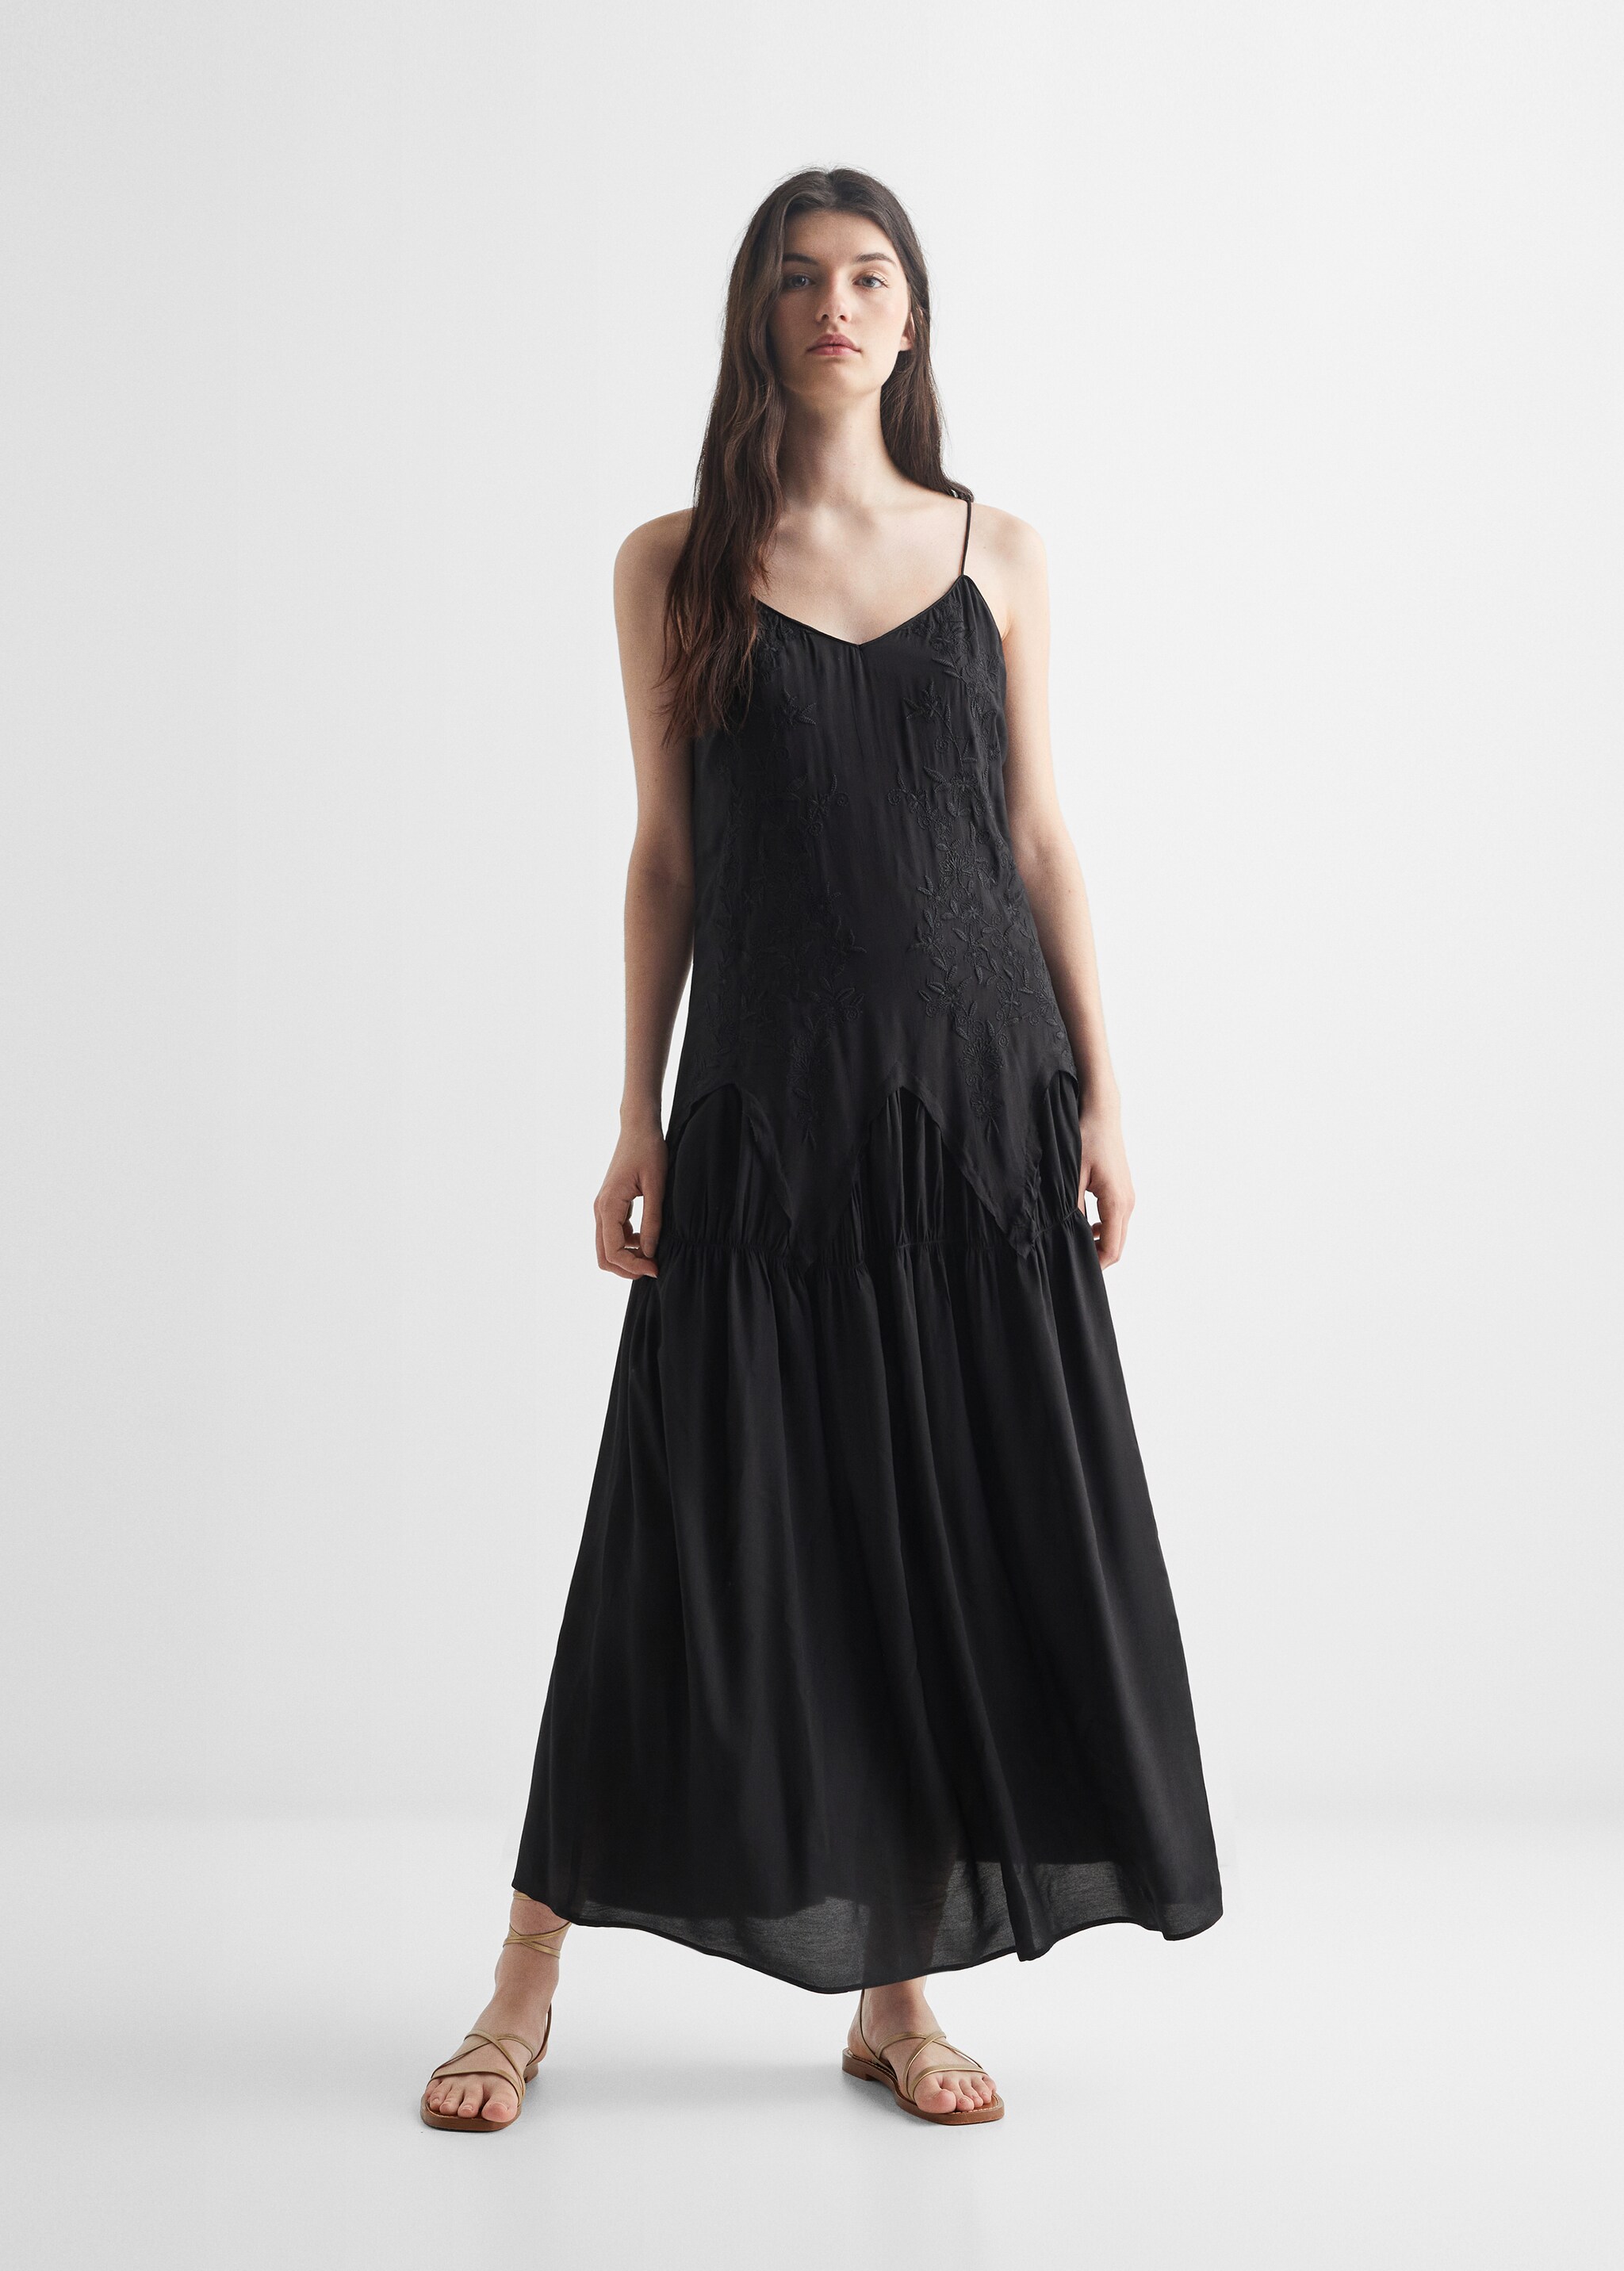 Embroidered long dress - General plane